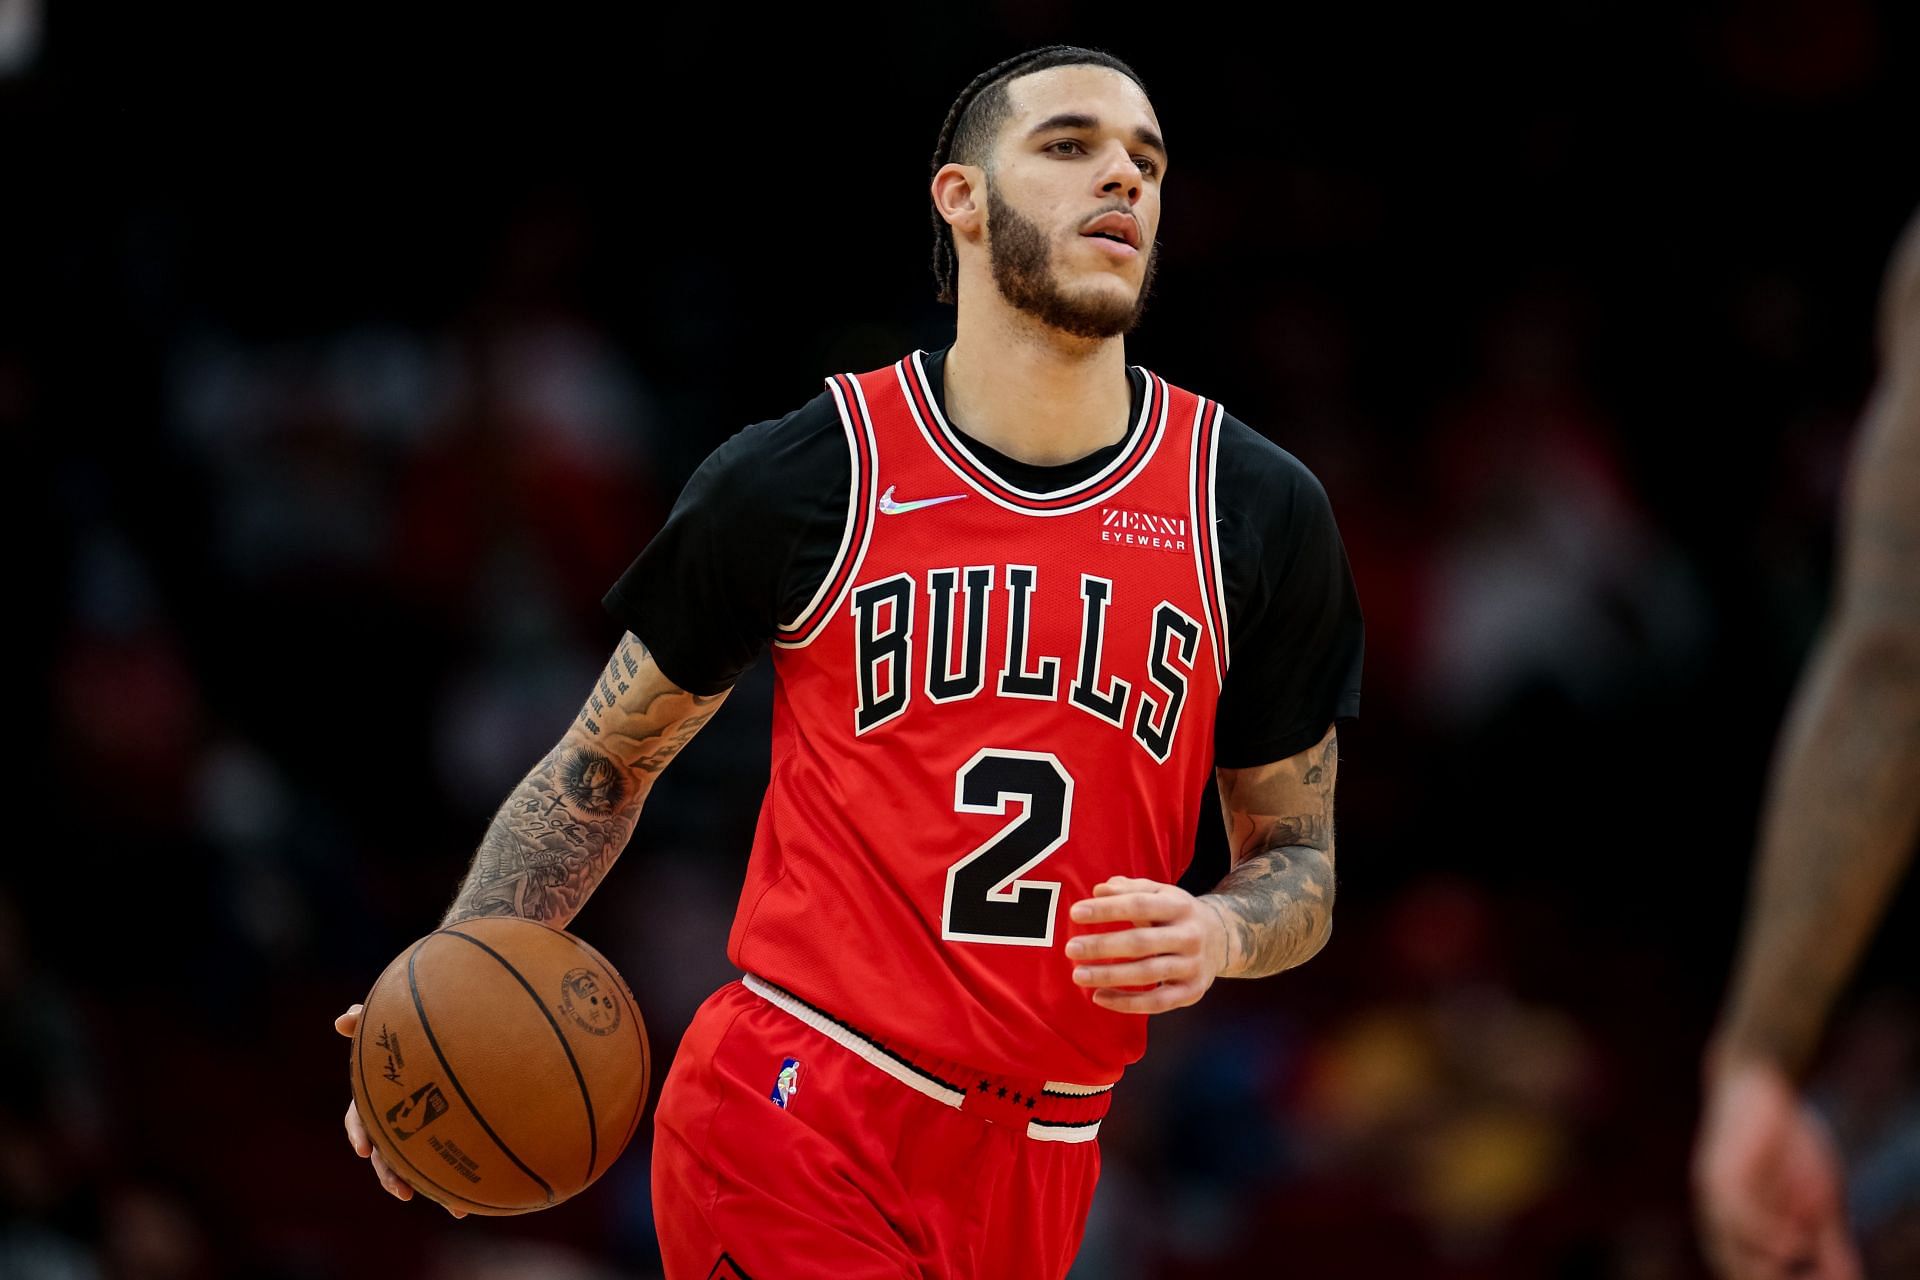 Lonzo Ball brings the ball up for the Chicago Bulls